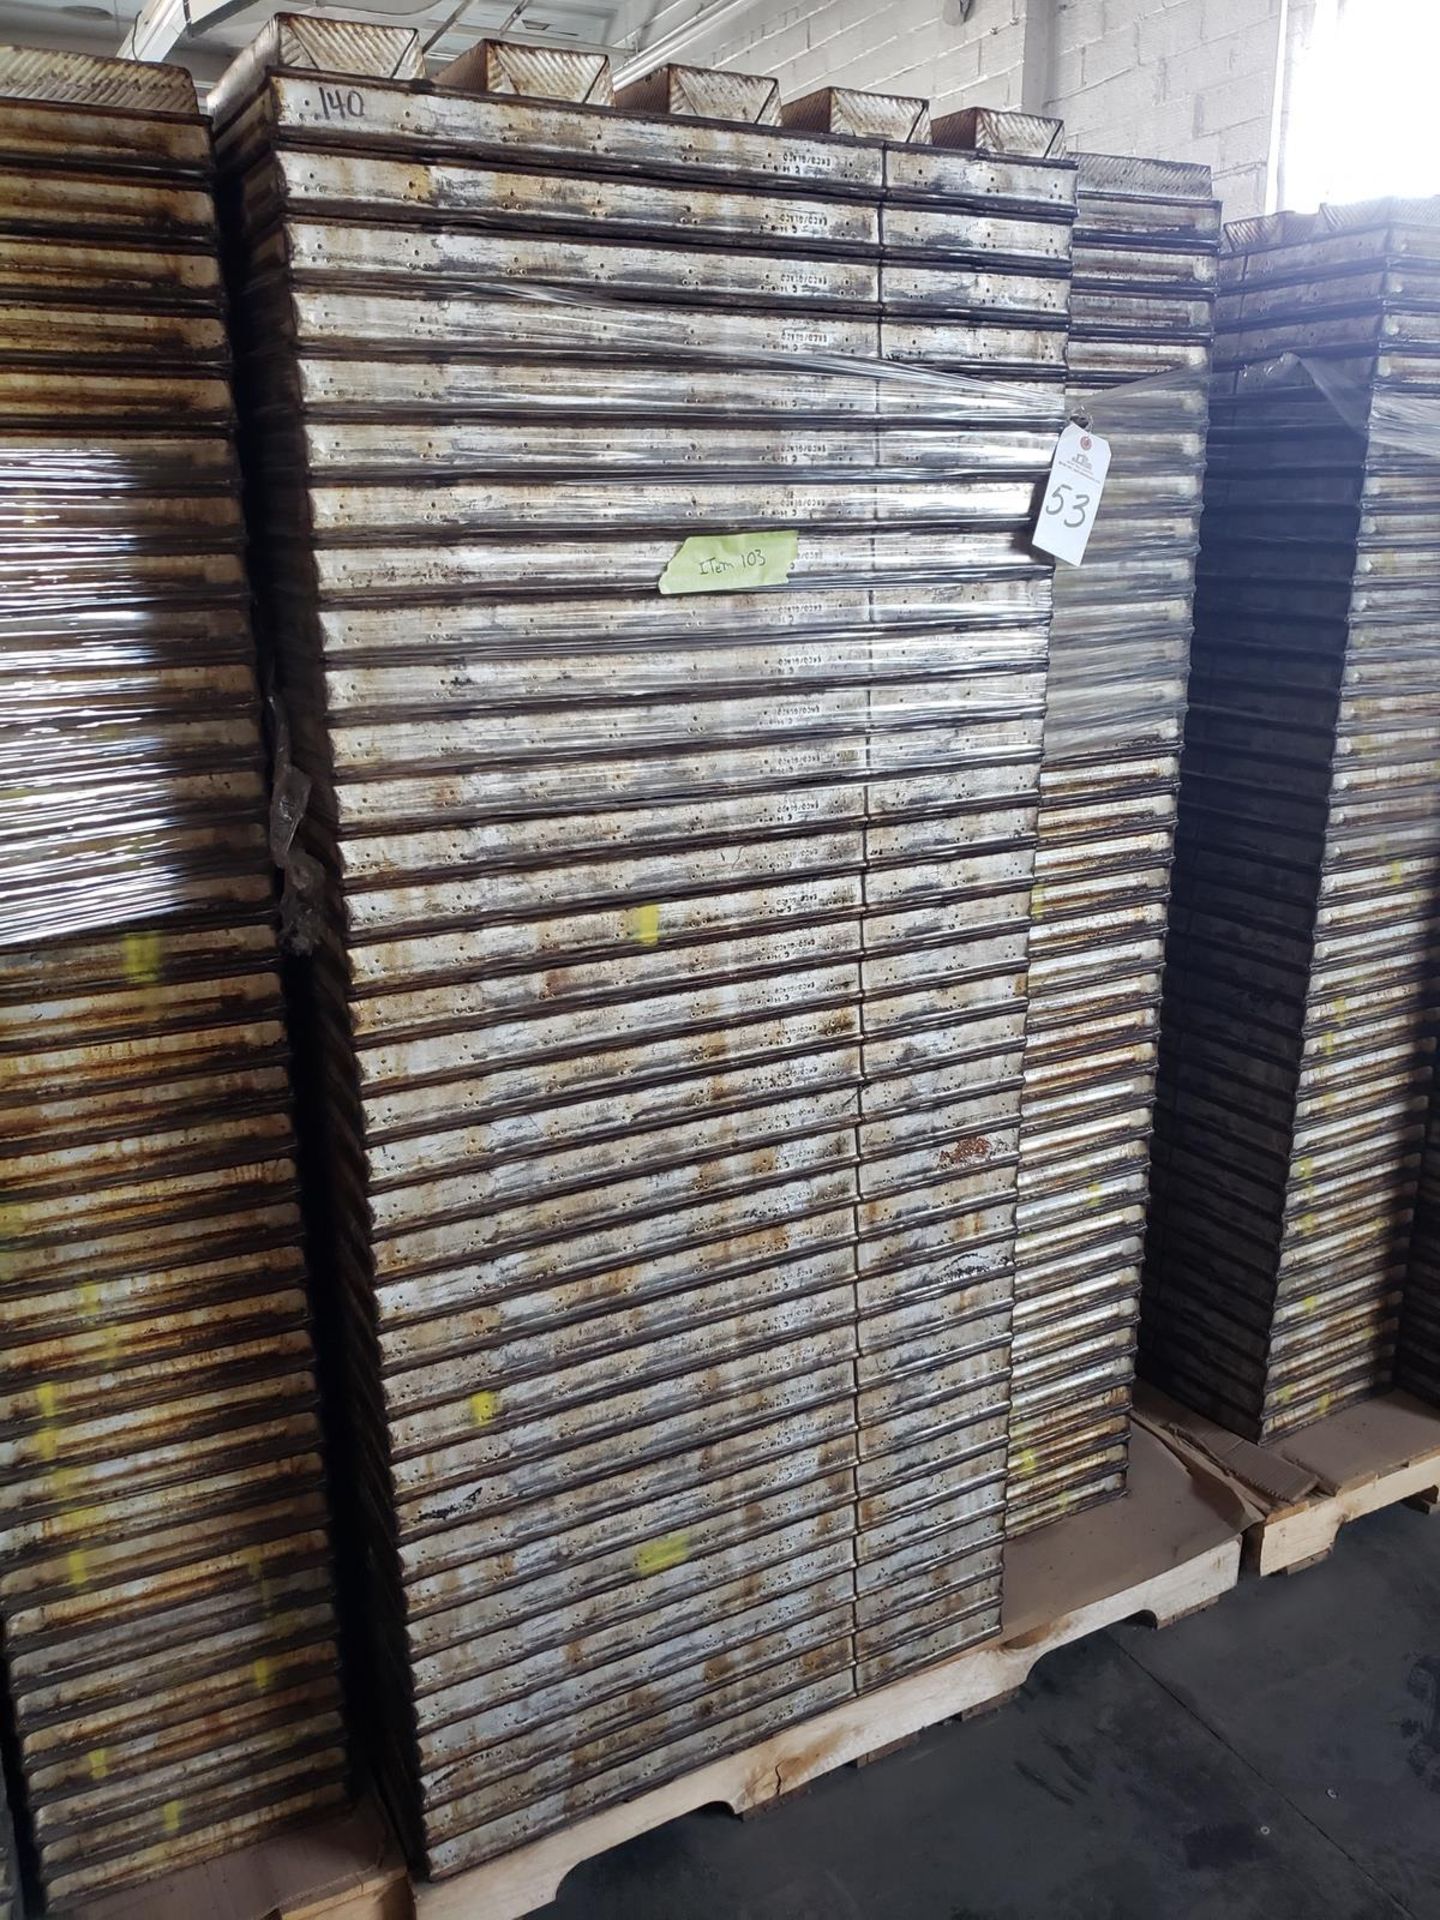 Lot of approx. 140 4 1/2" X 12" 5 Strap Bread Baking Pans | Rig Fee: $100